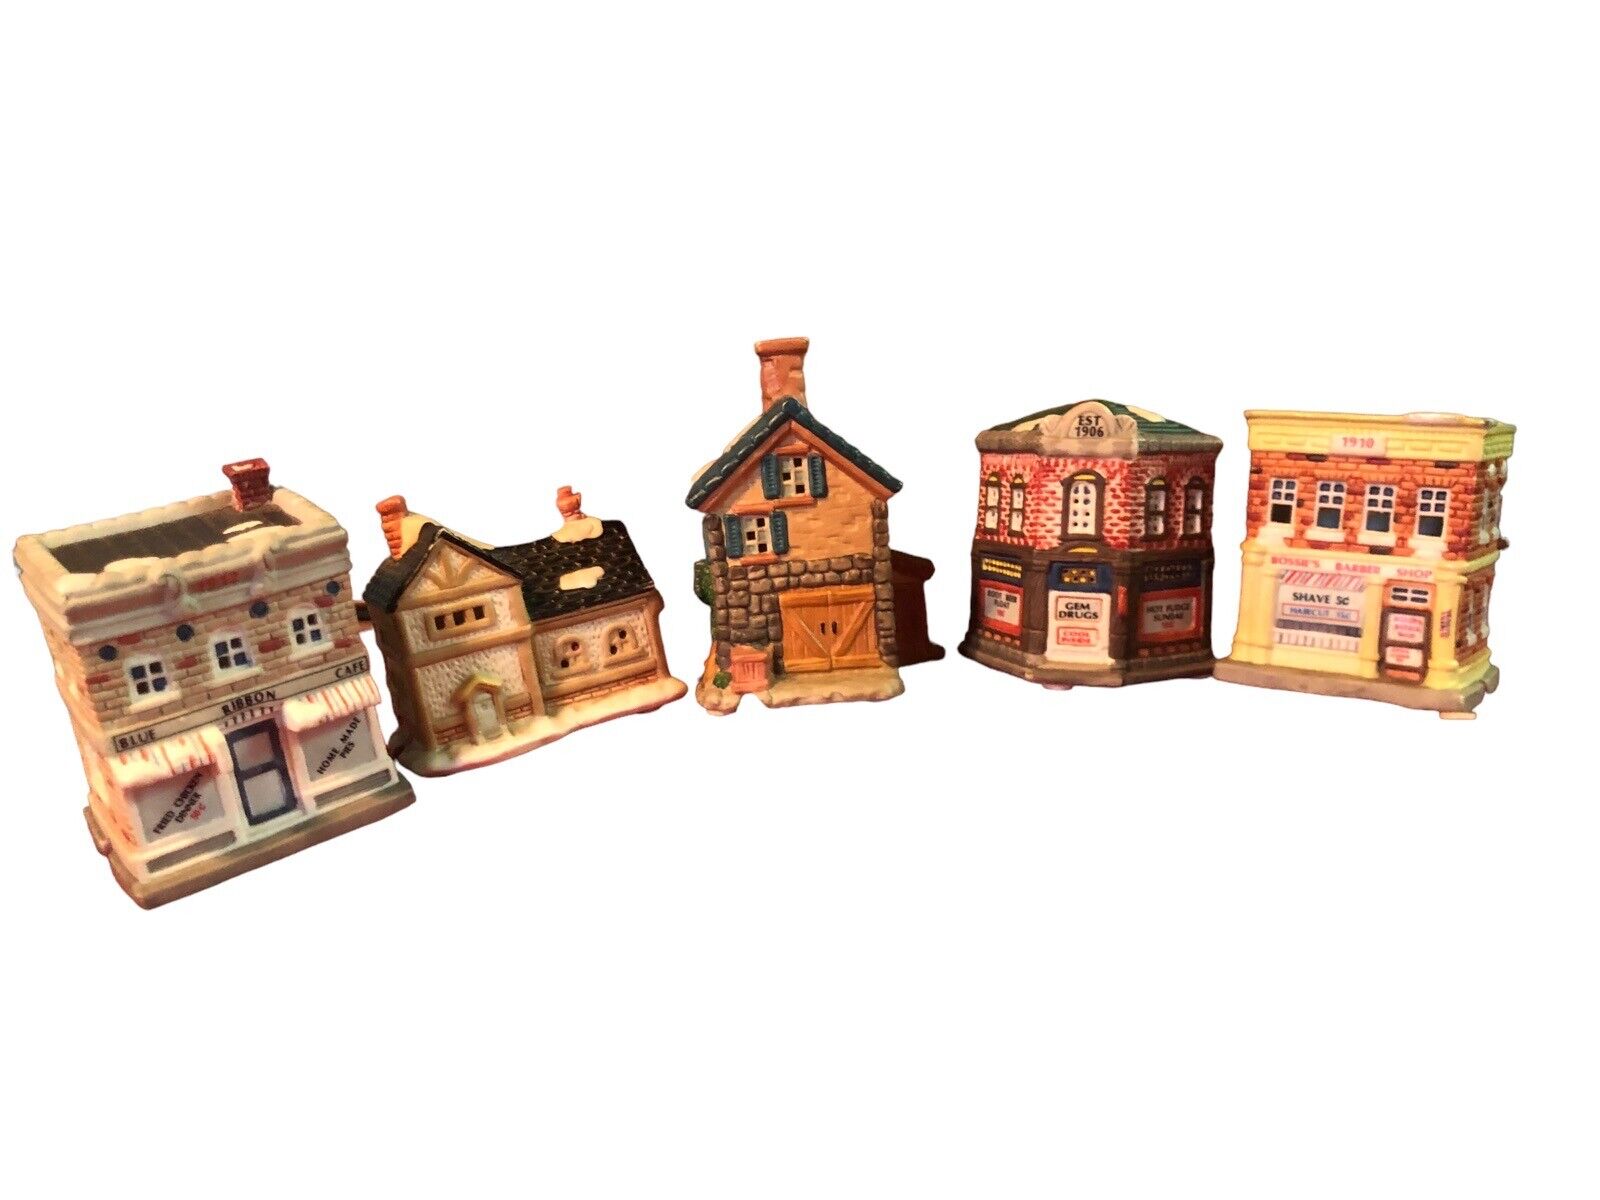 Lot of 5 American Landmarks Collection Ceramic Holiday Time Christmas Village